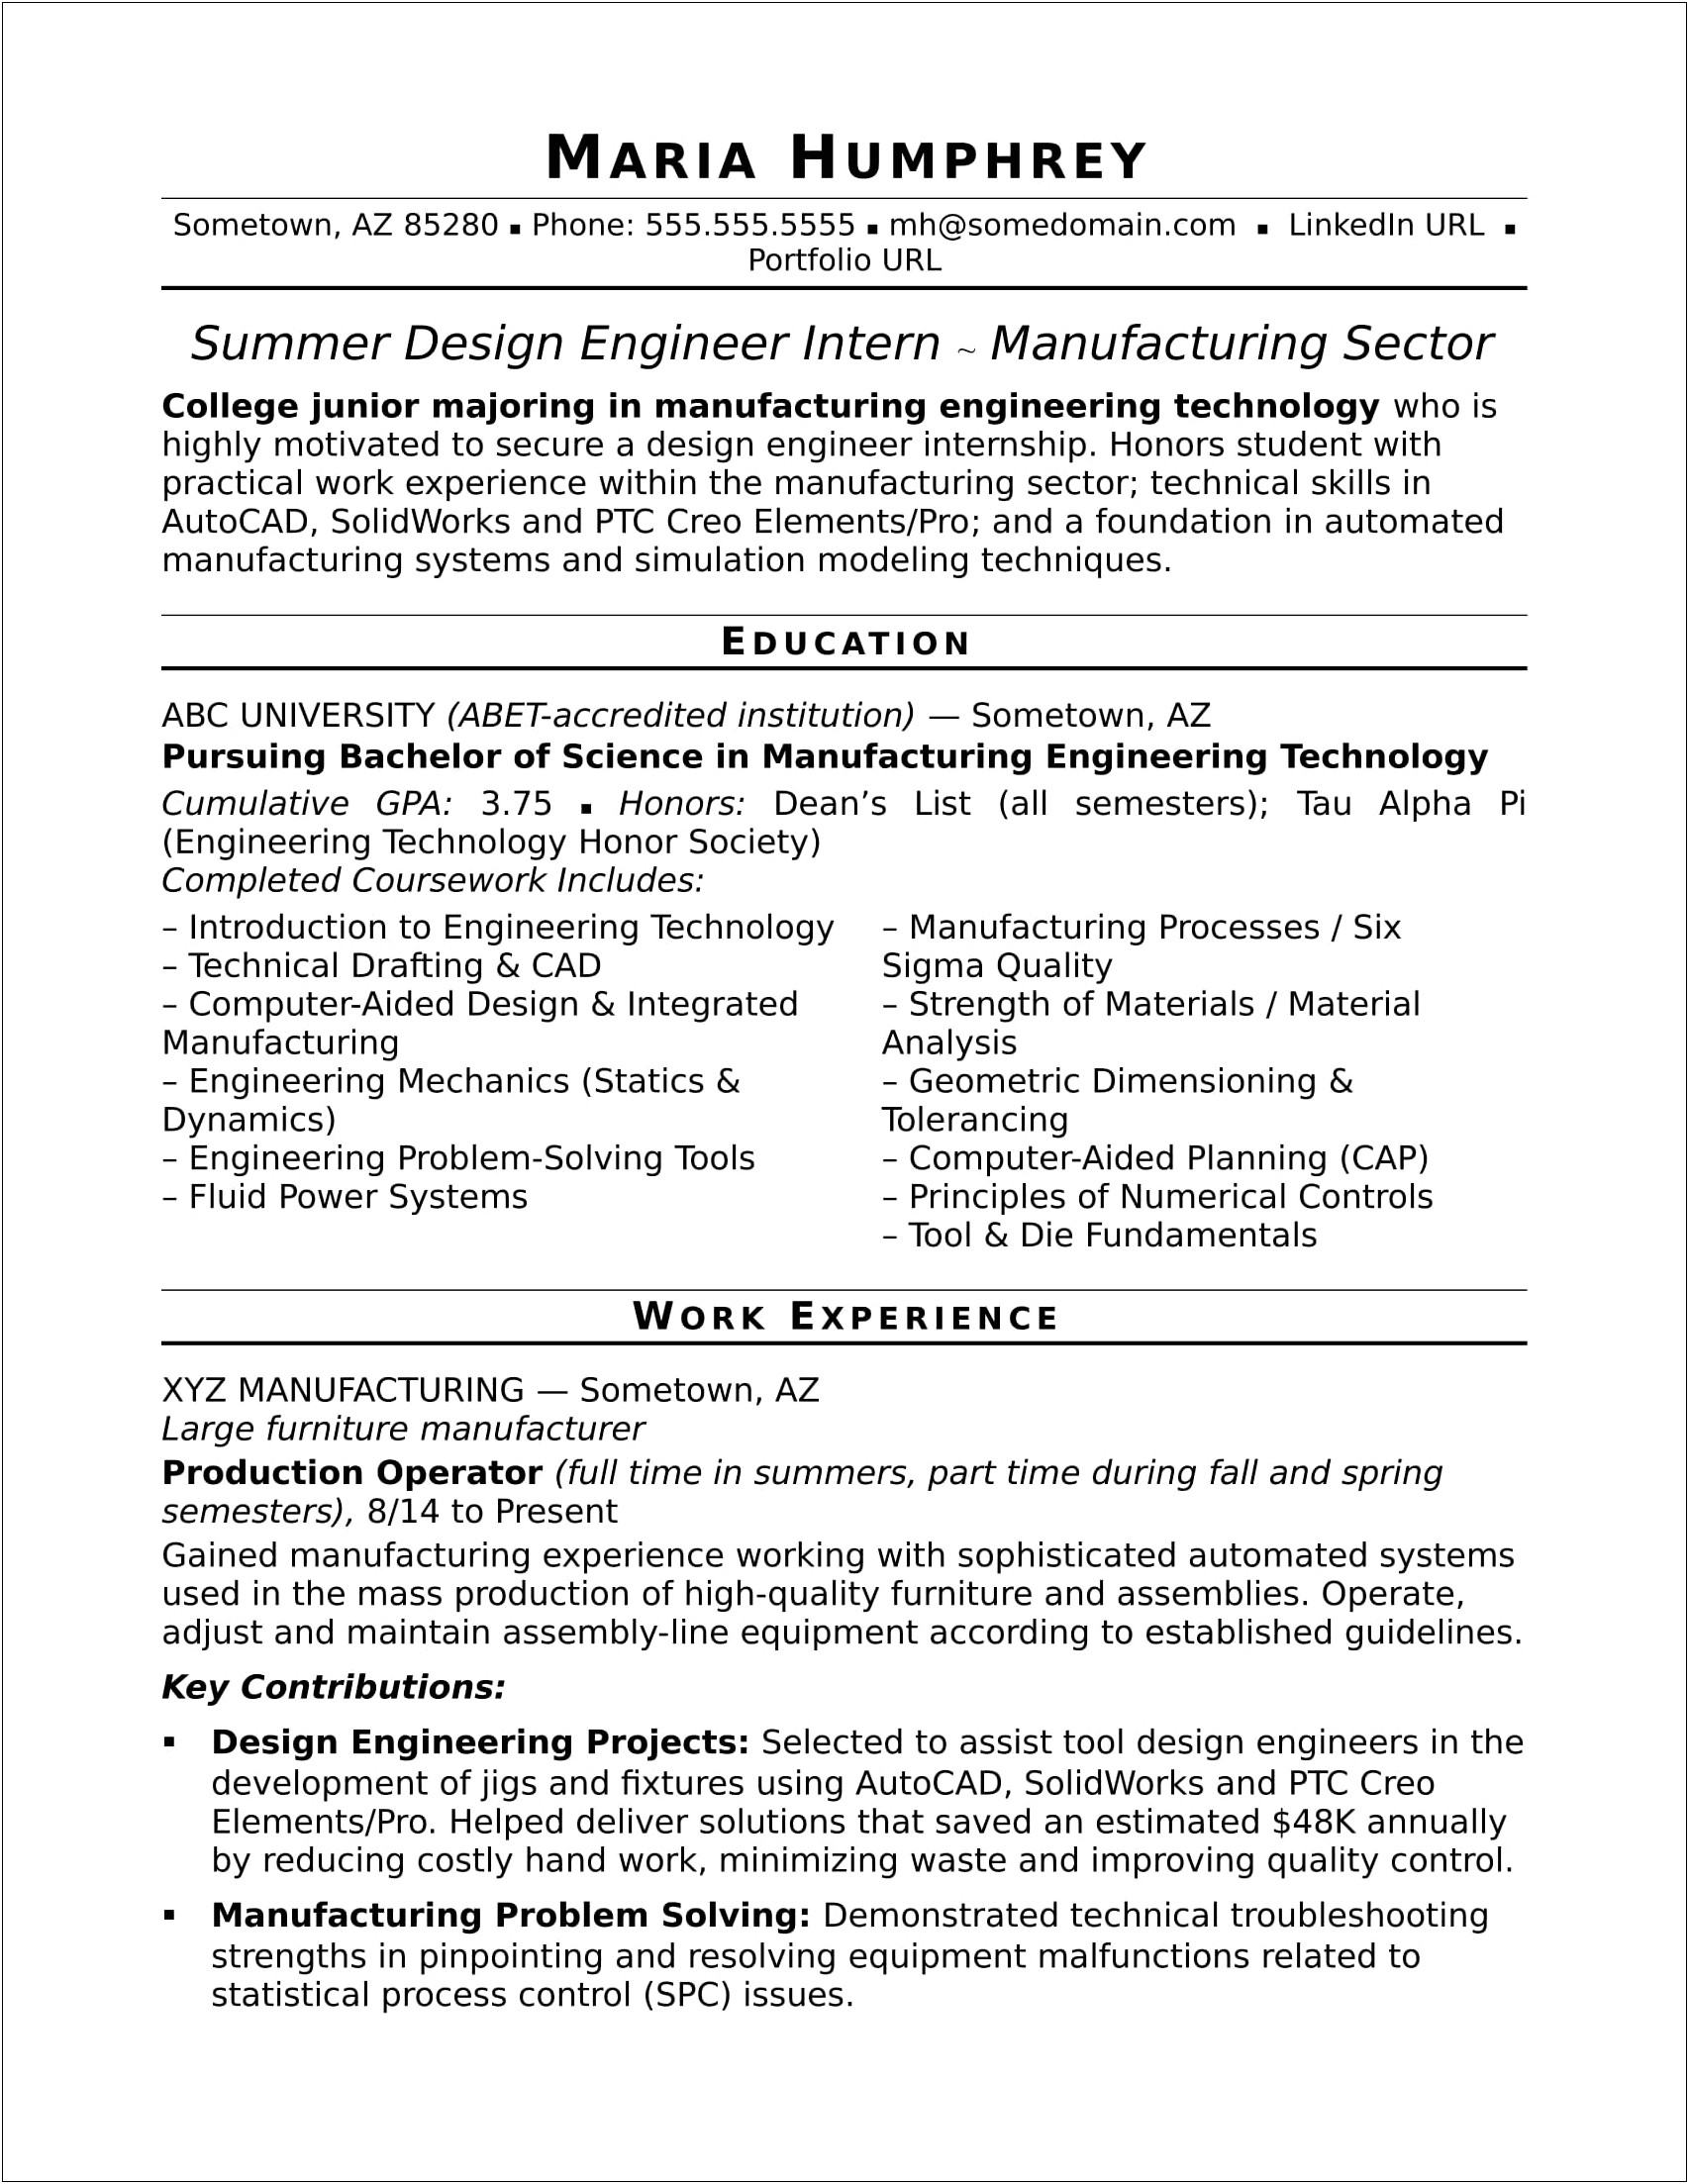 Work Experience Resume For Engineer